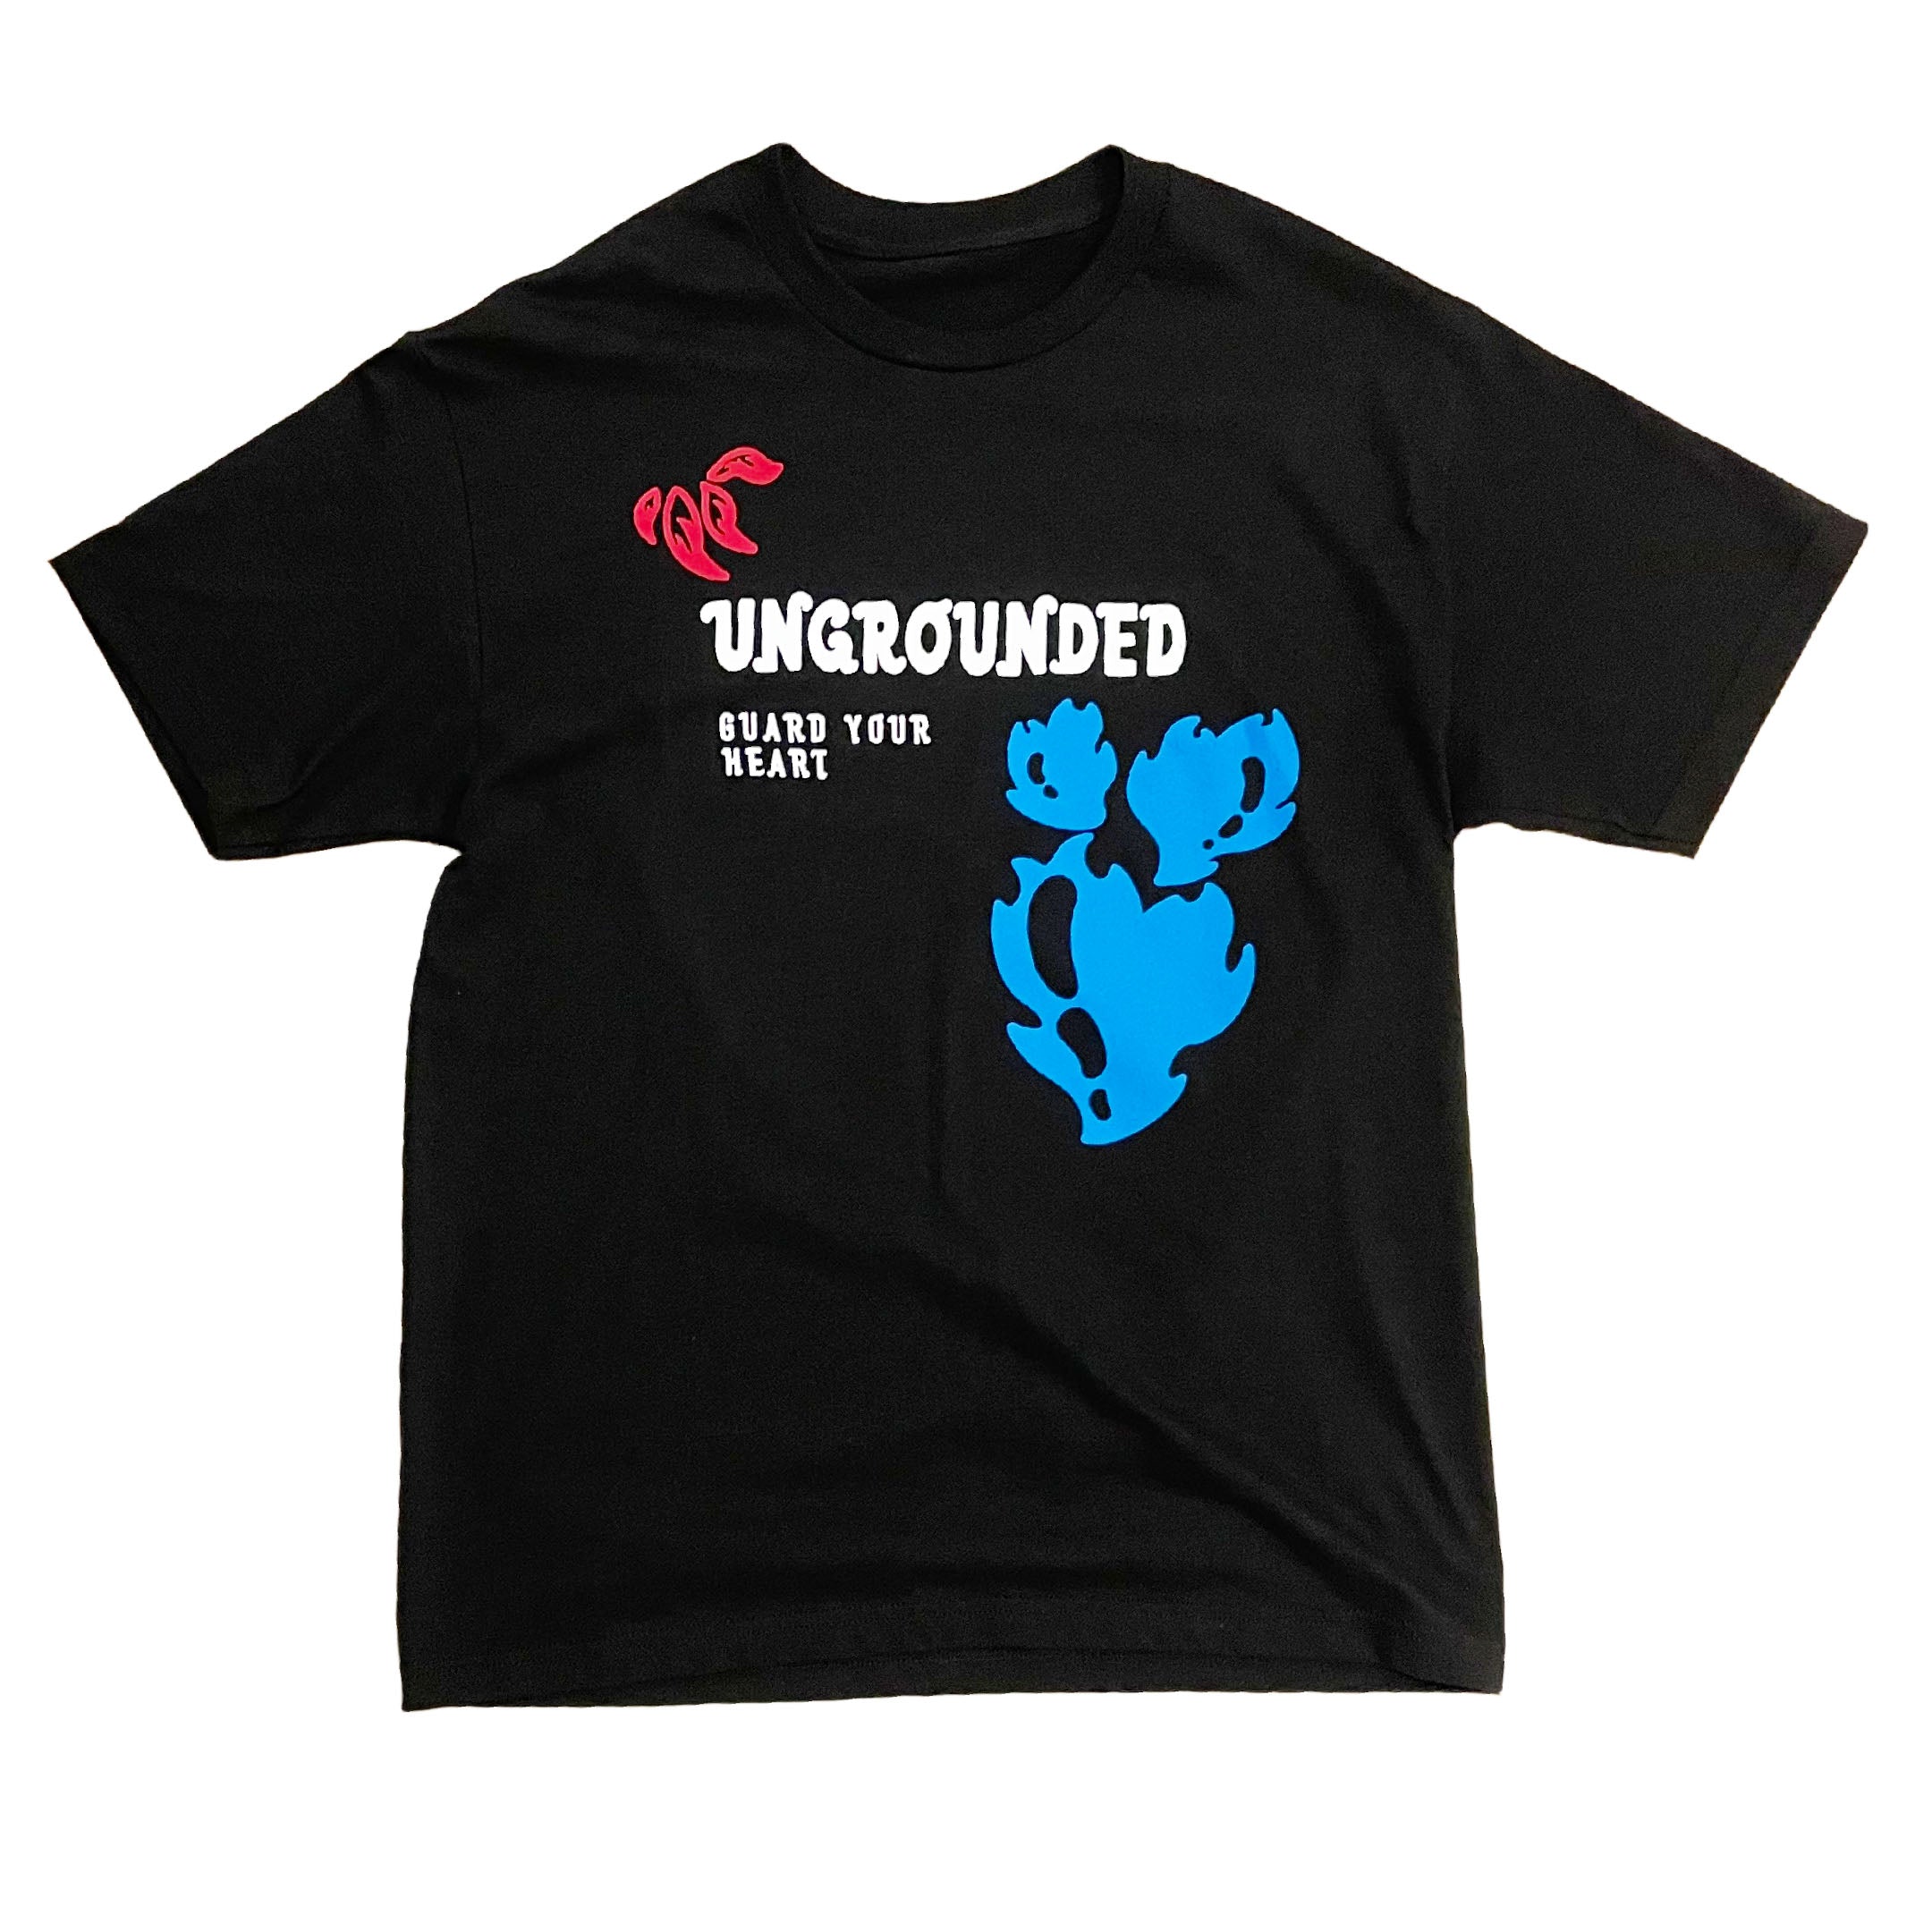 Ungrounded 'Guard Your Heart' Tee (Black)